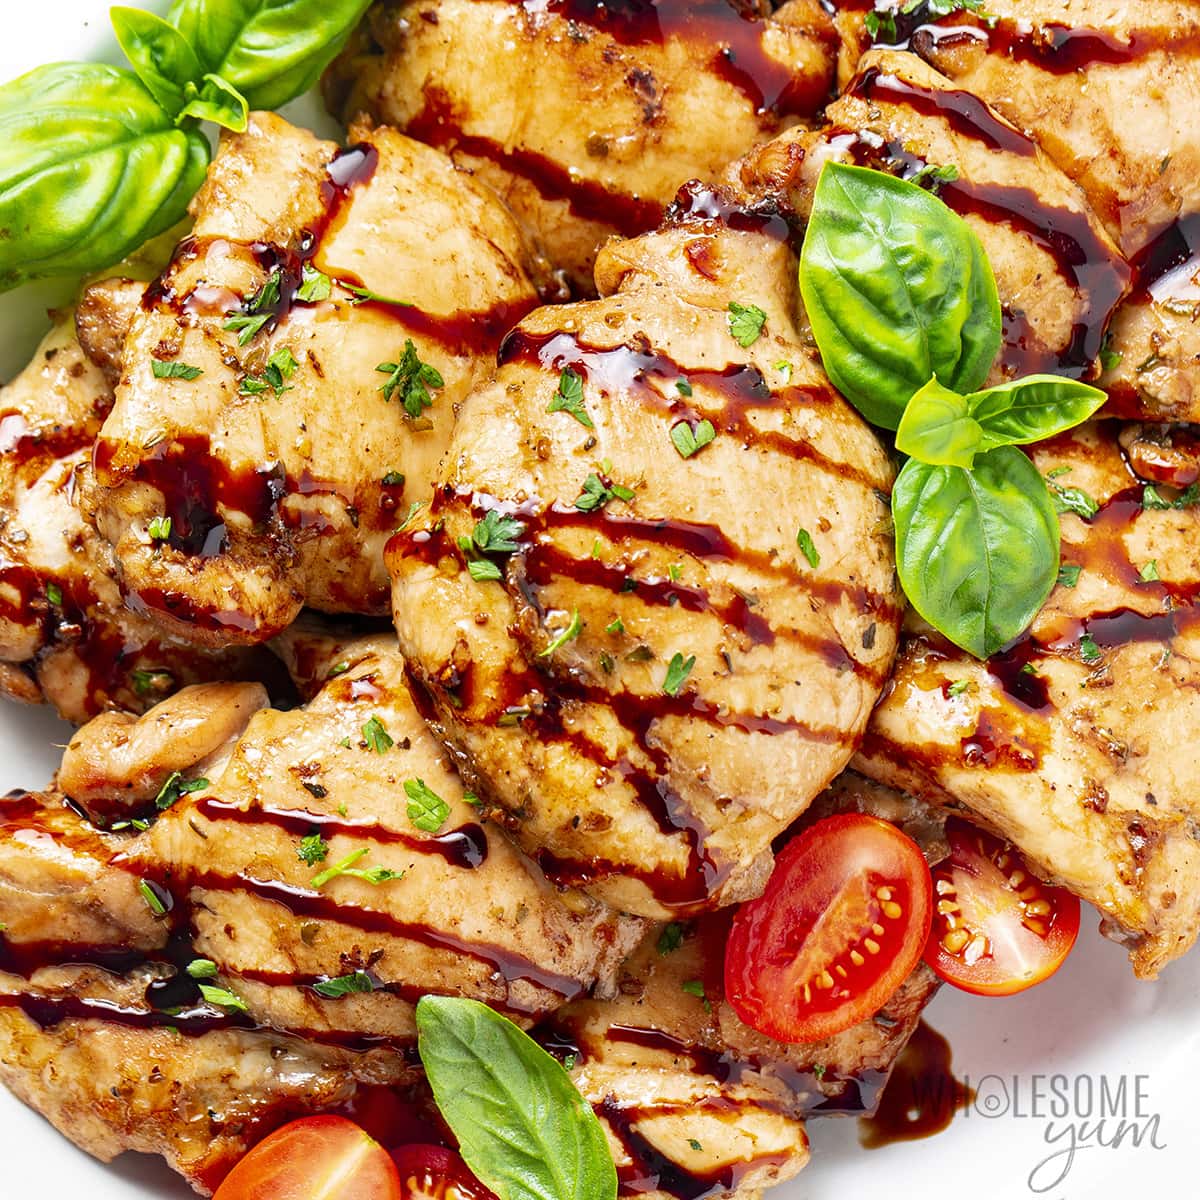 Balsamic chicken with glaze and fresh basil.